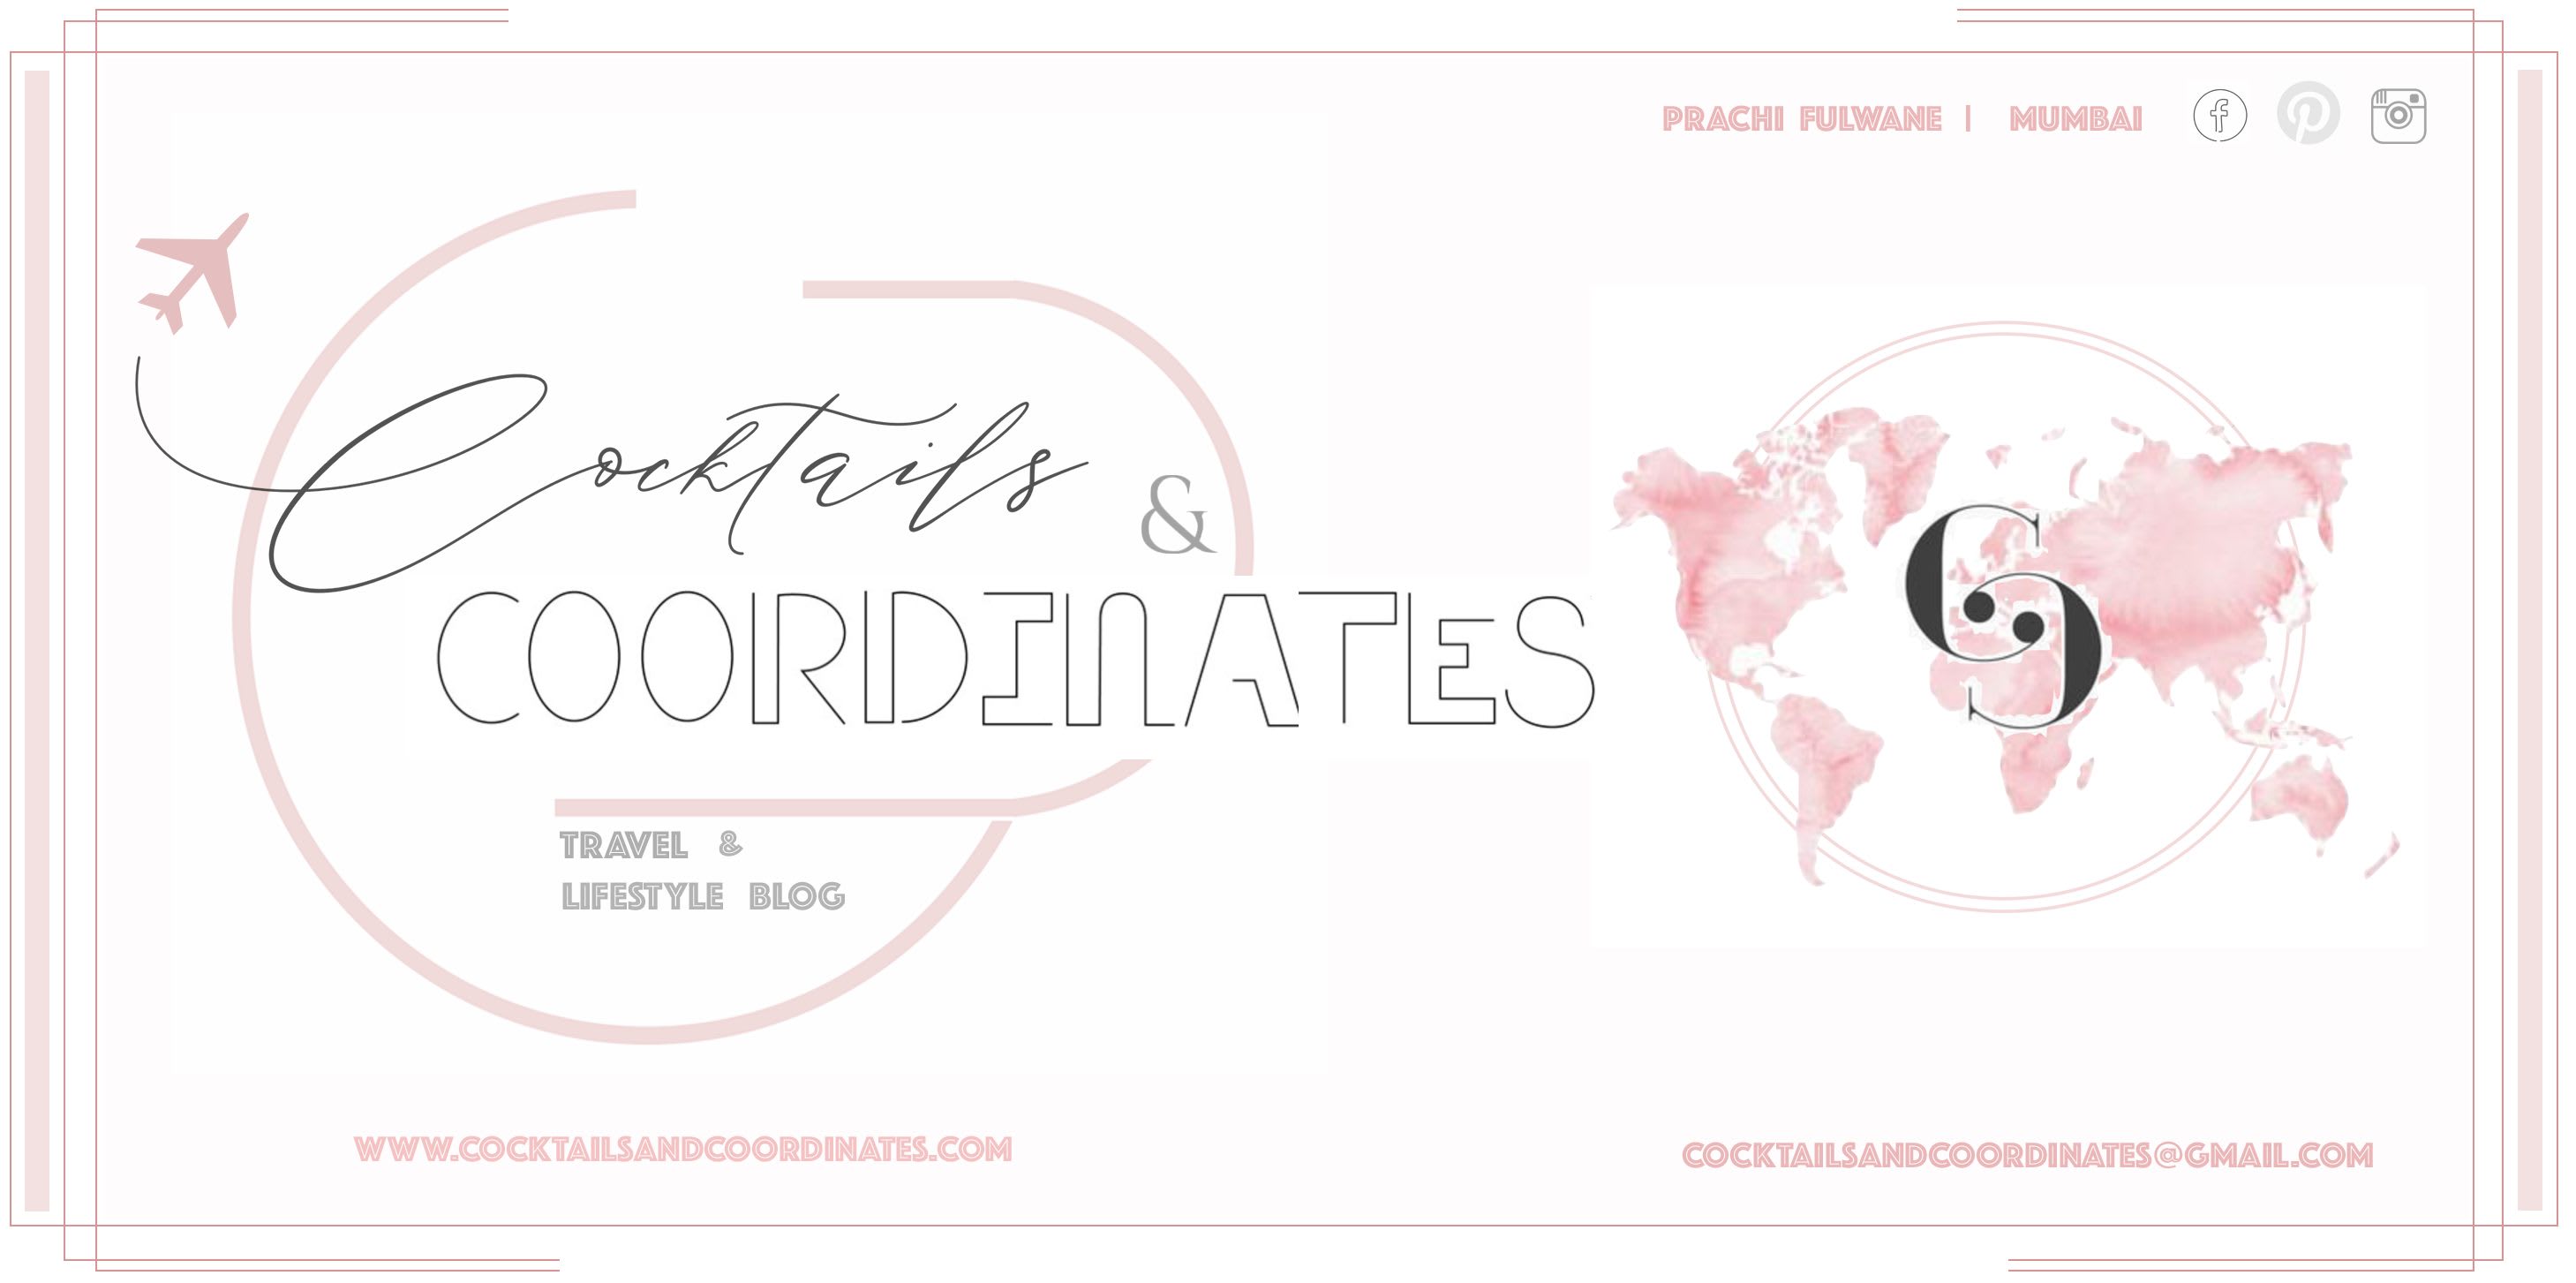 Cocktails And Coordinates